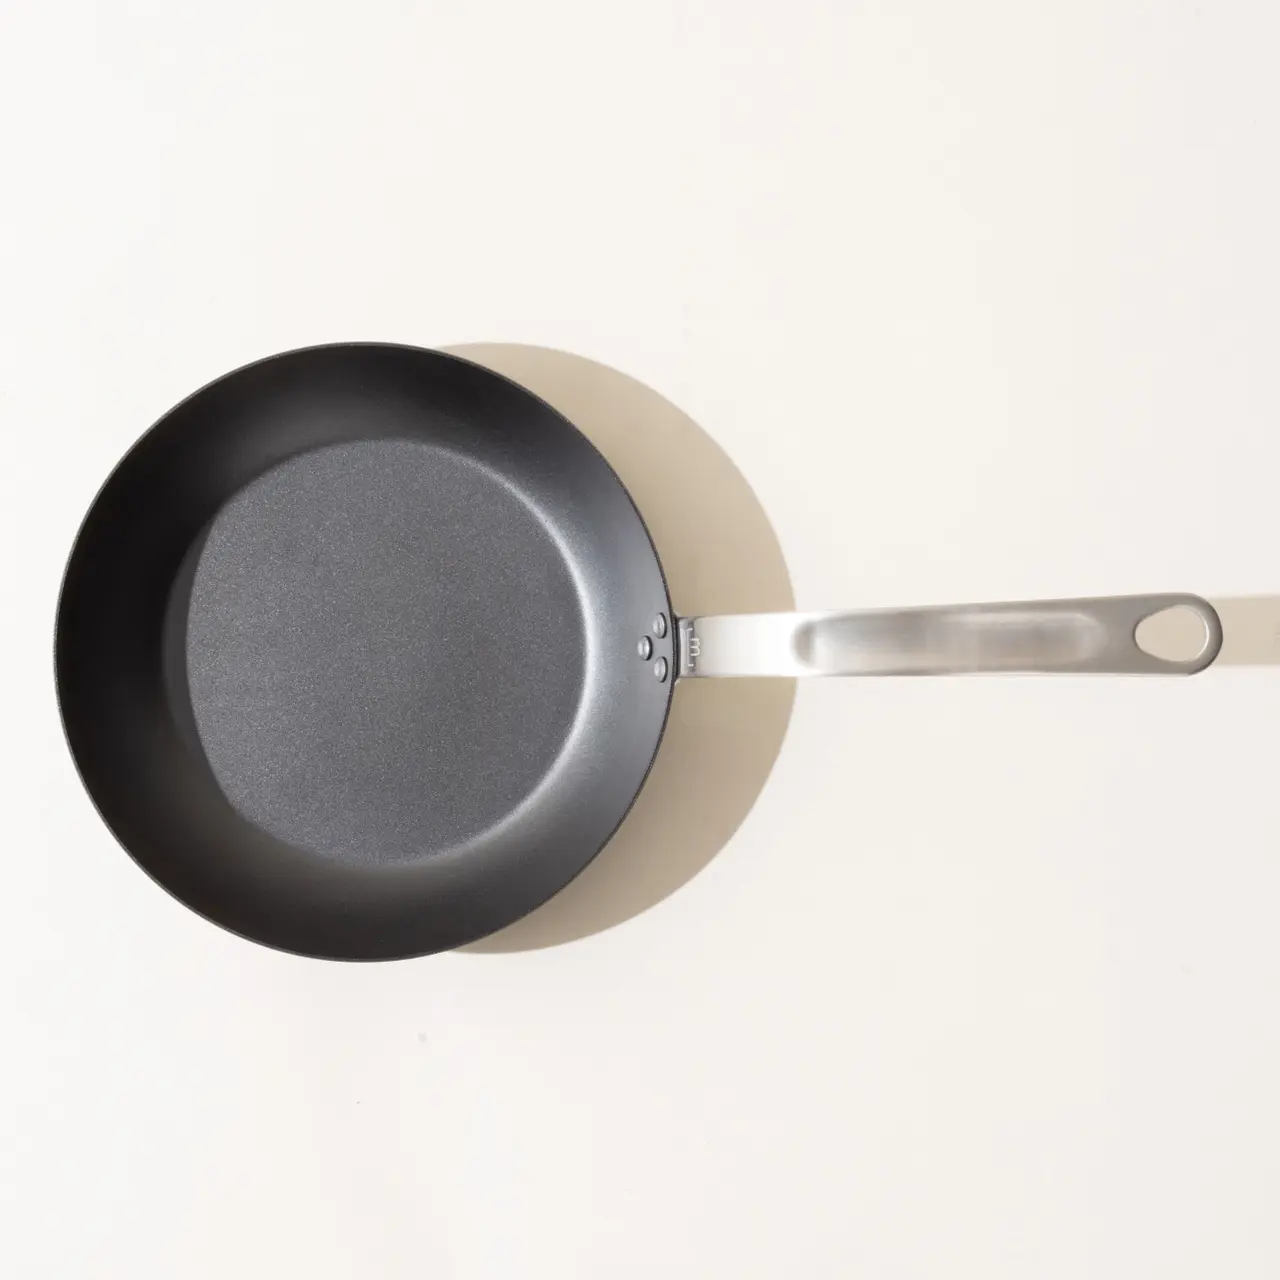 A non-stick frying pan with a silver handle on a light background, viewed from above.